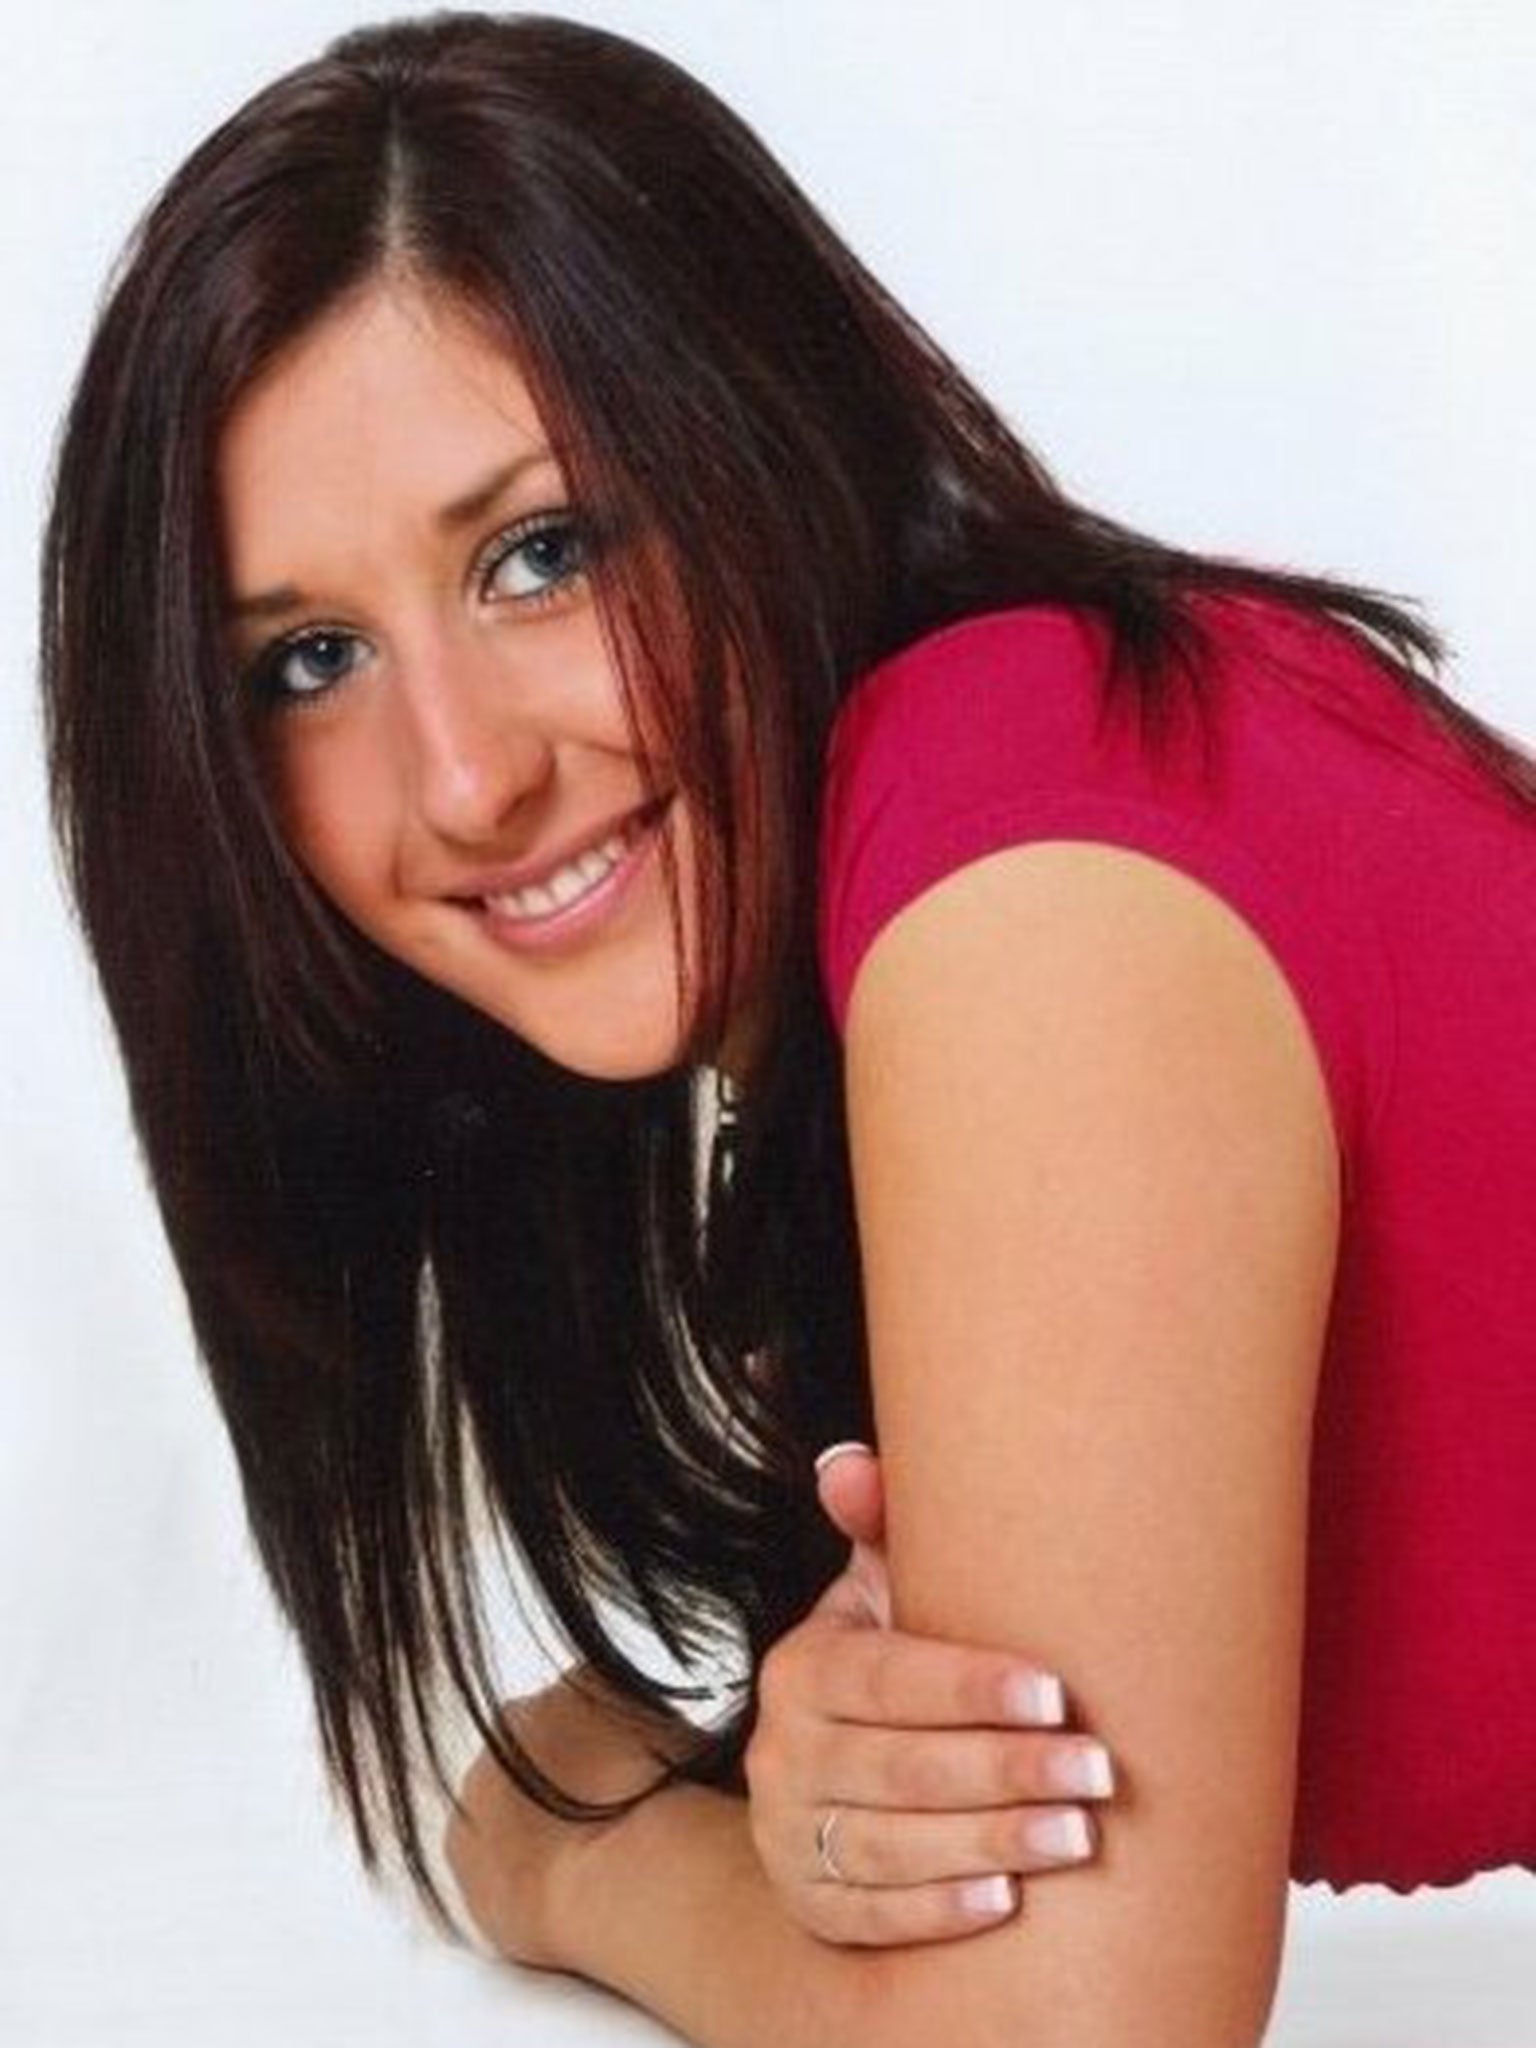 Jodie Willsher, 30, was stabbed to death in the Skipton branch of Aldi days before Christmas